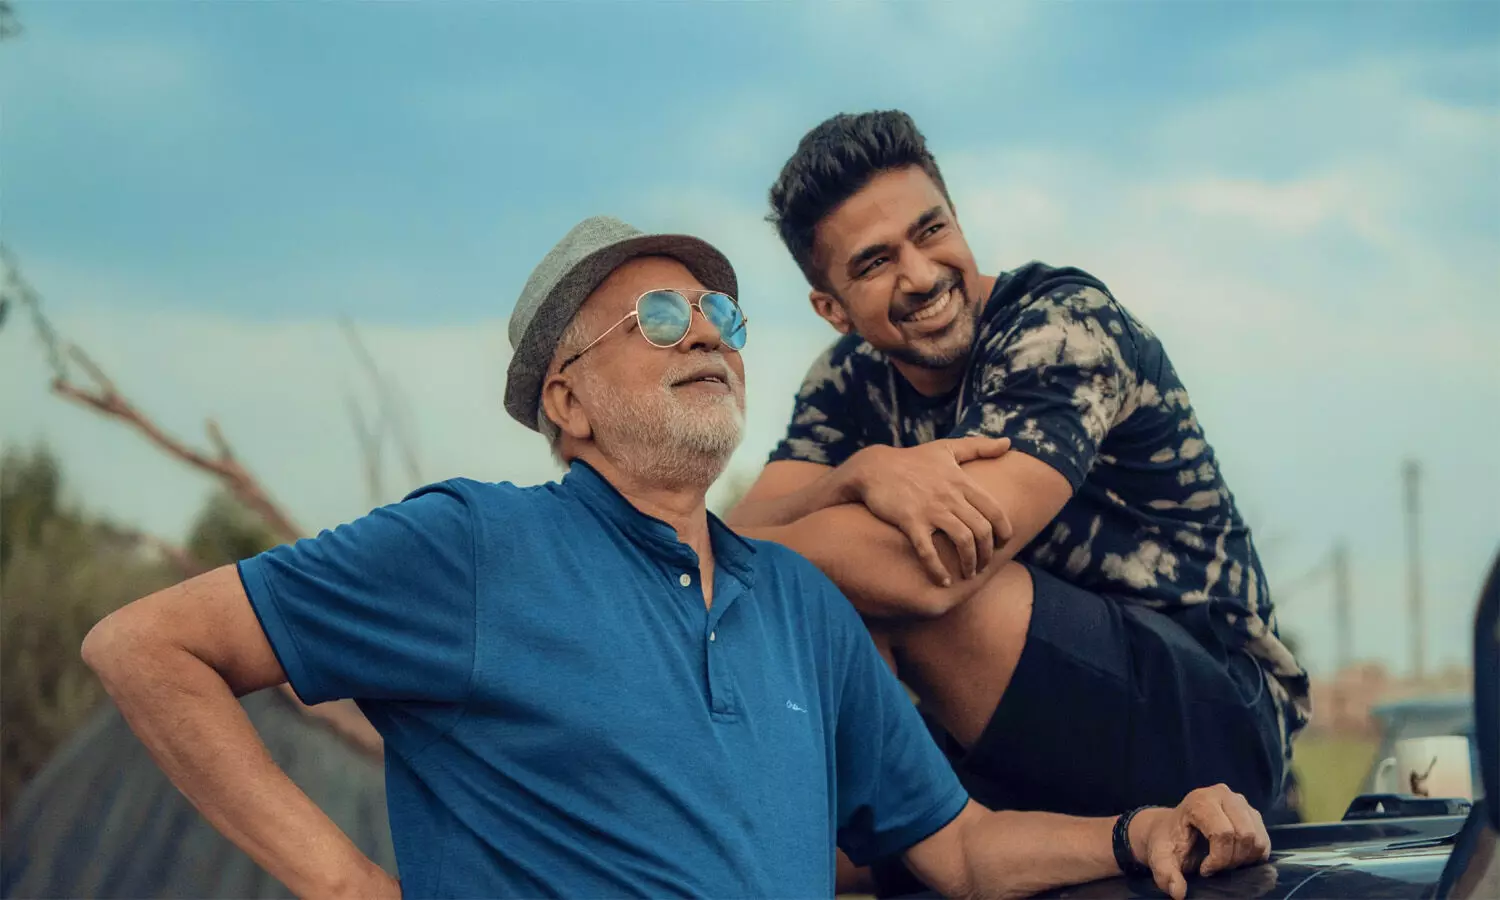 Actor Saqib Saleem lists his top picks for some father-son bonding this Fathers Day